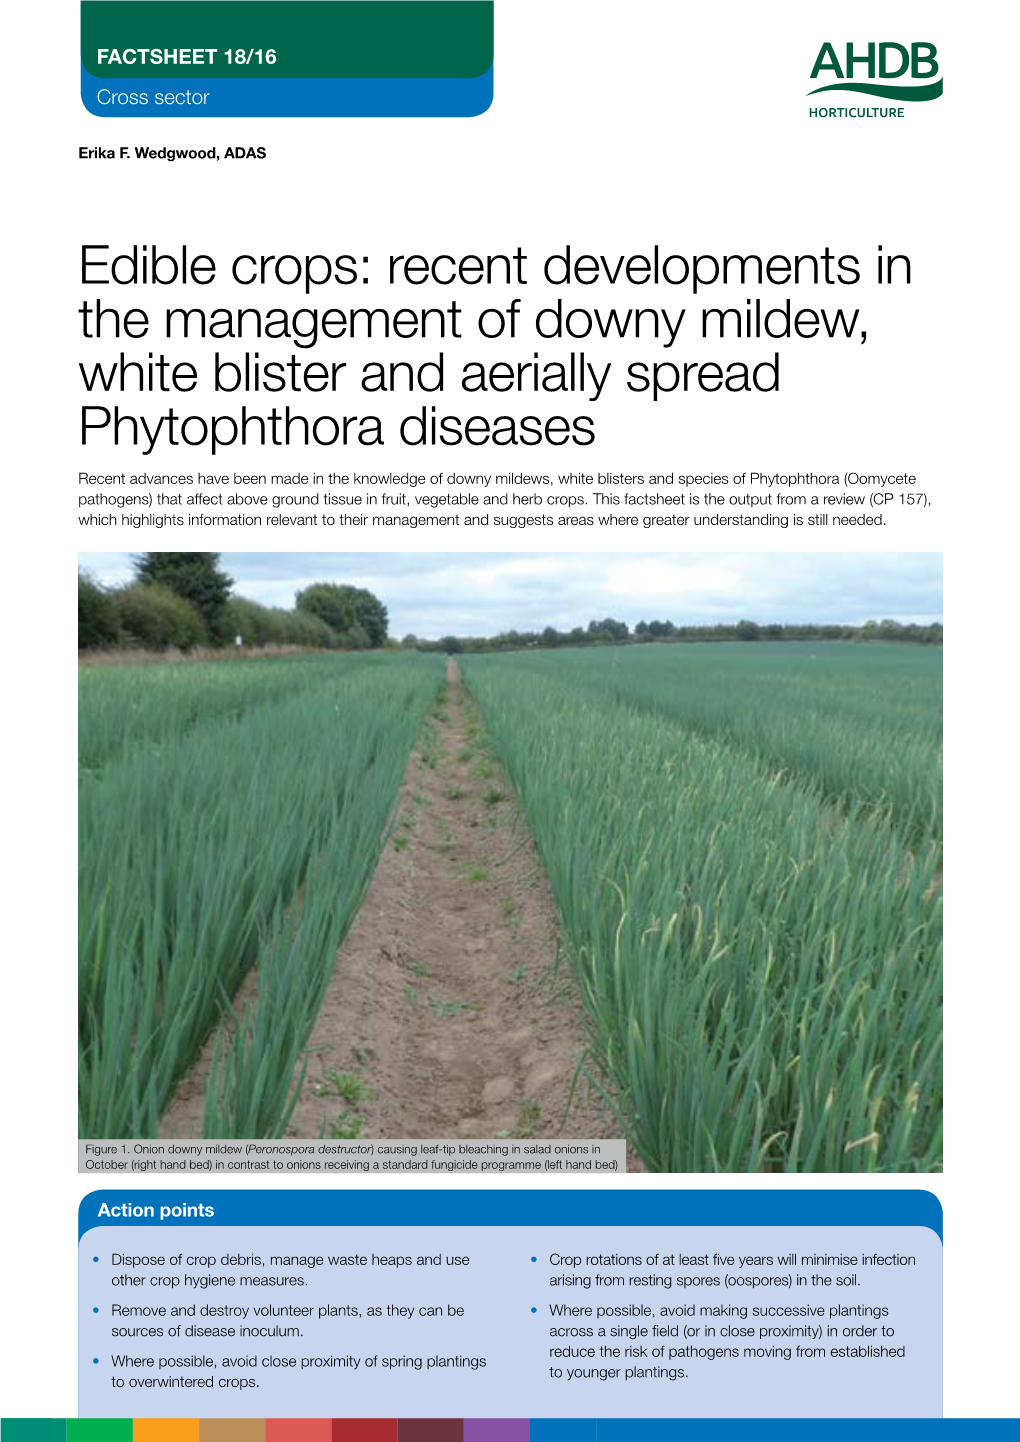 Edible Crops: Recent Developments in the Management of Downy Mildew, White Blister and Aerially Spread Phytophthora Diseases